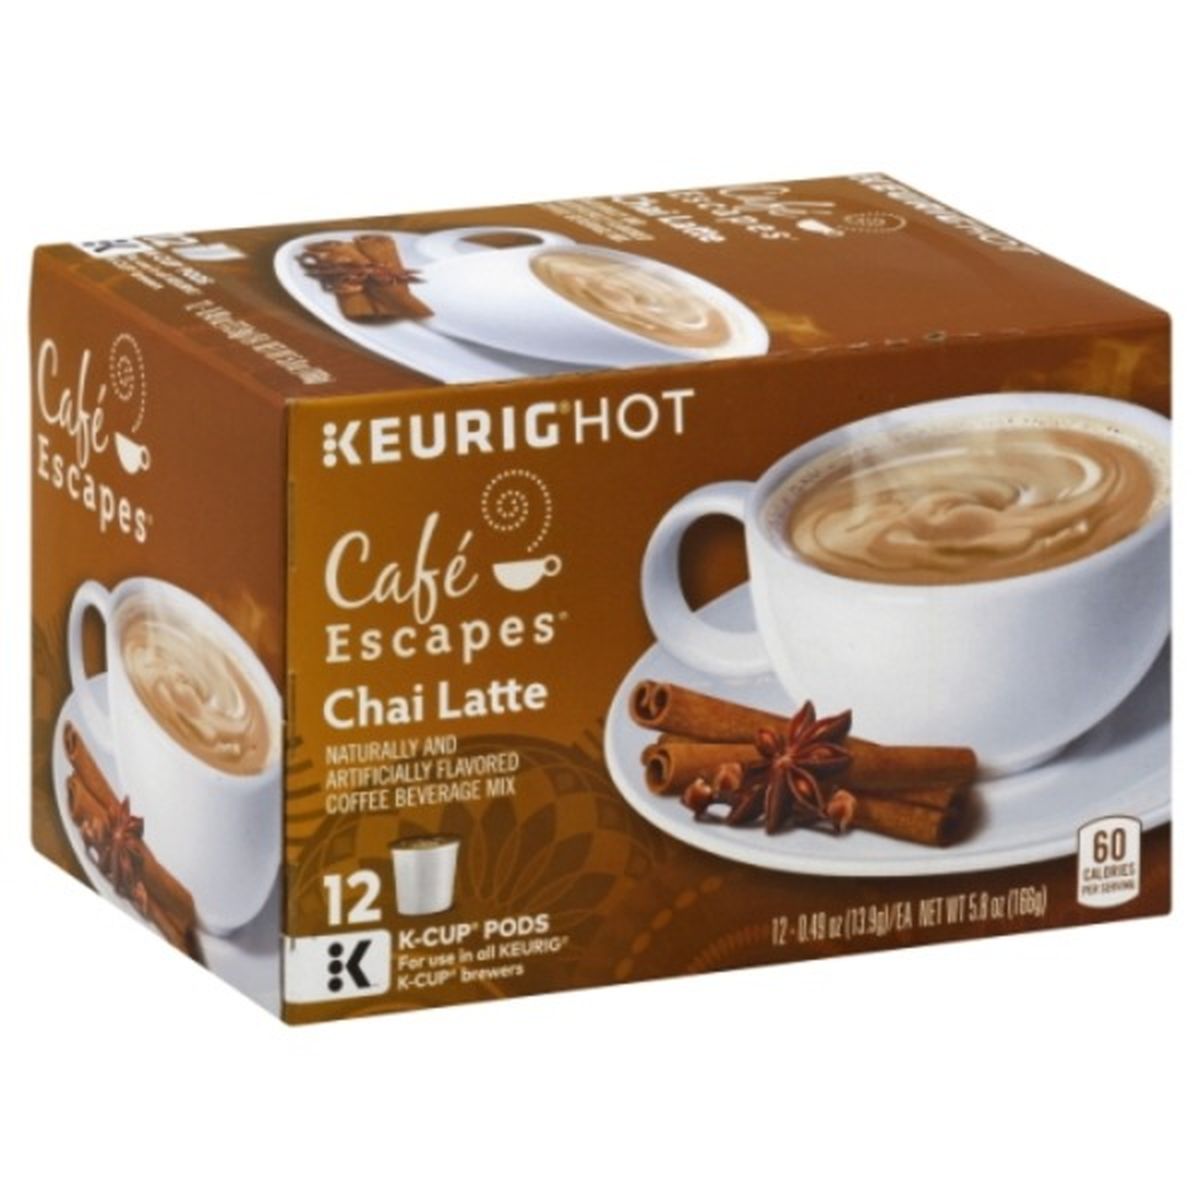 Calories in Cafe Escapes Keurig Hot Coffee Beverage Mix, Chai Latte, K-Cup Pods